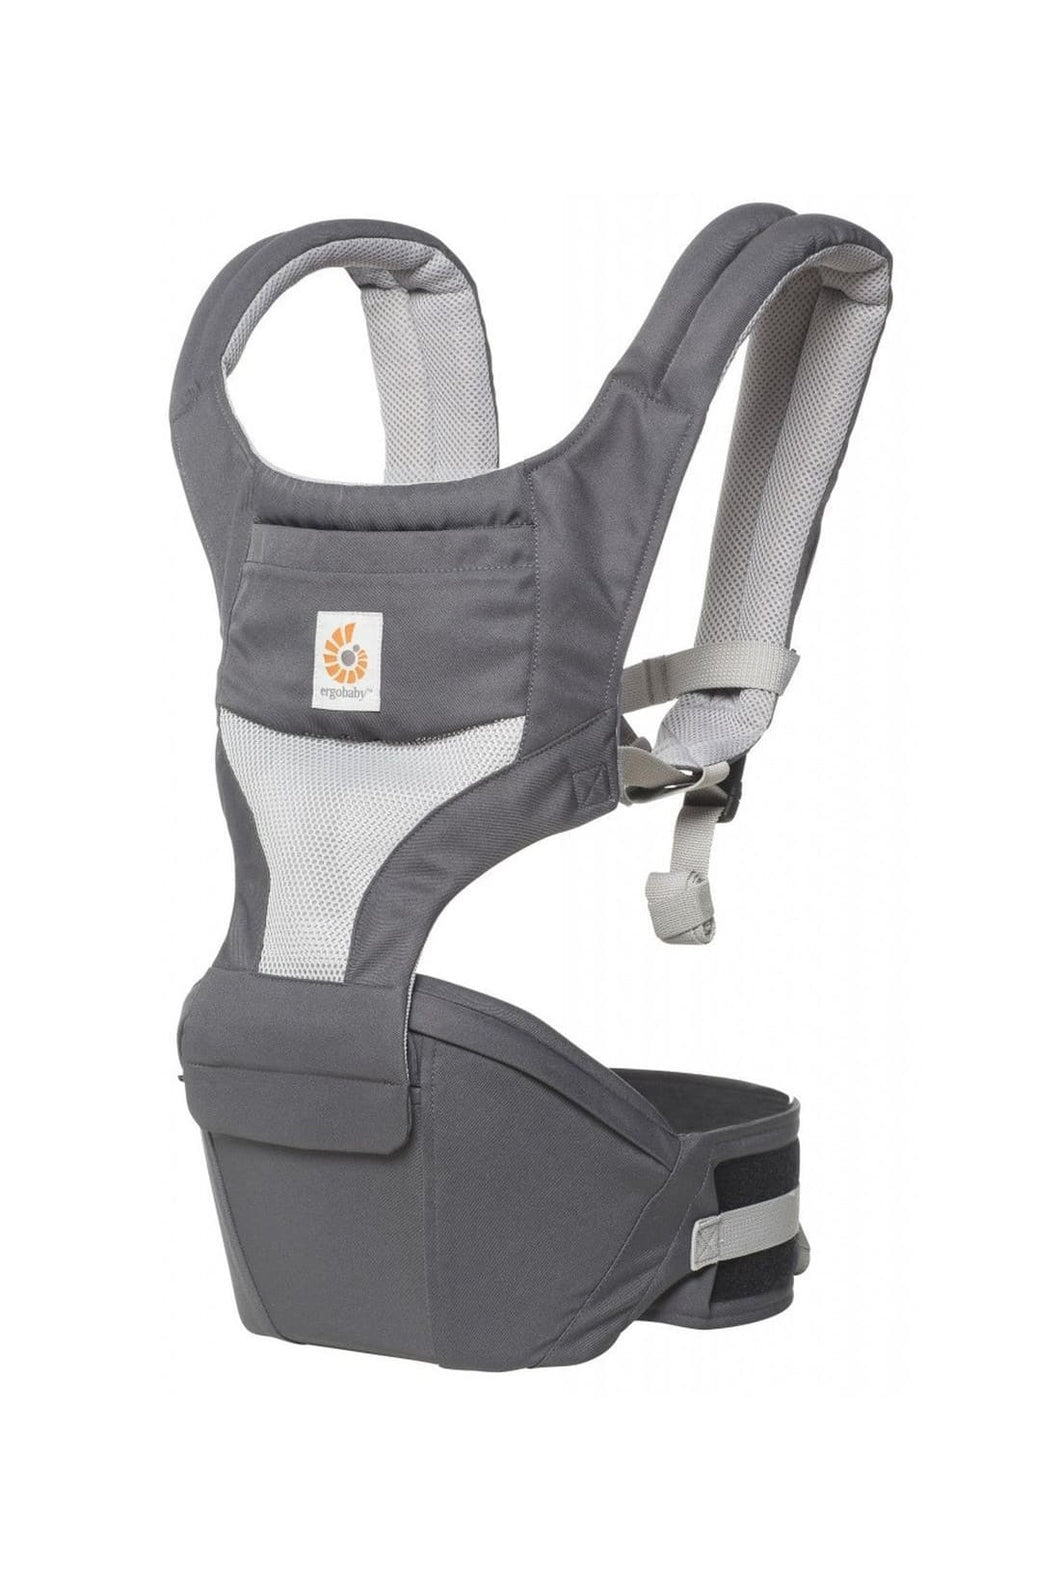 Ergobaby 6 Position Hipseat Baby Carrier Cool Grey 1